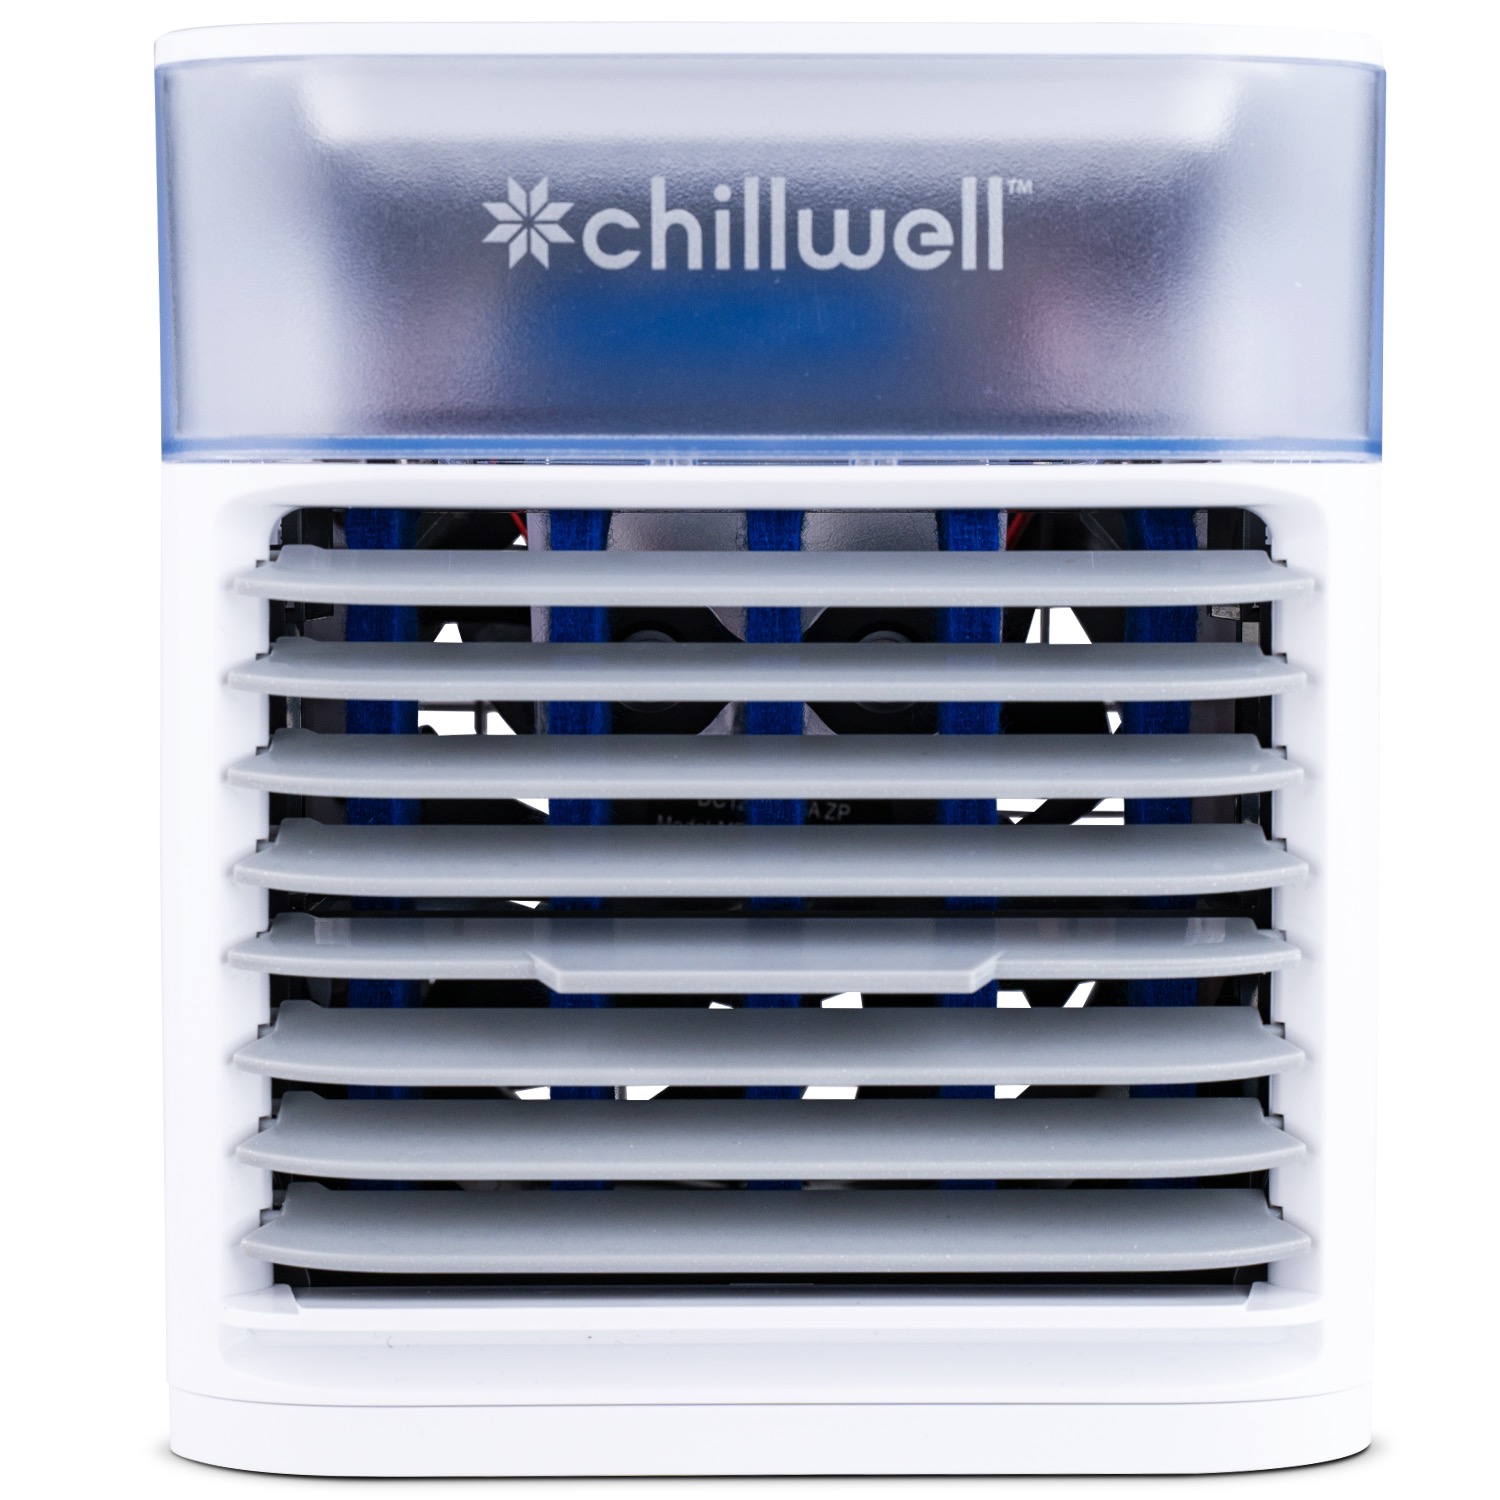 Chillwell AC Portable Ac Reviews Amazon